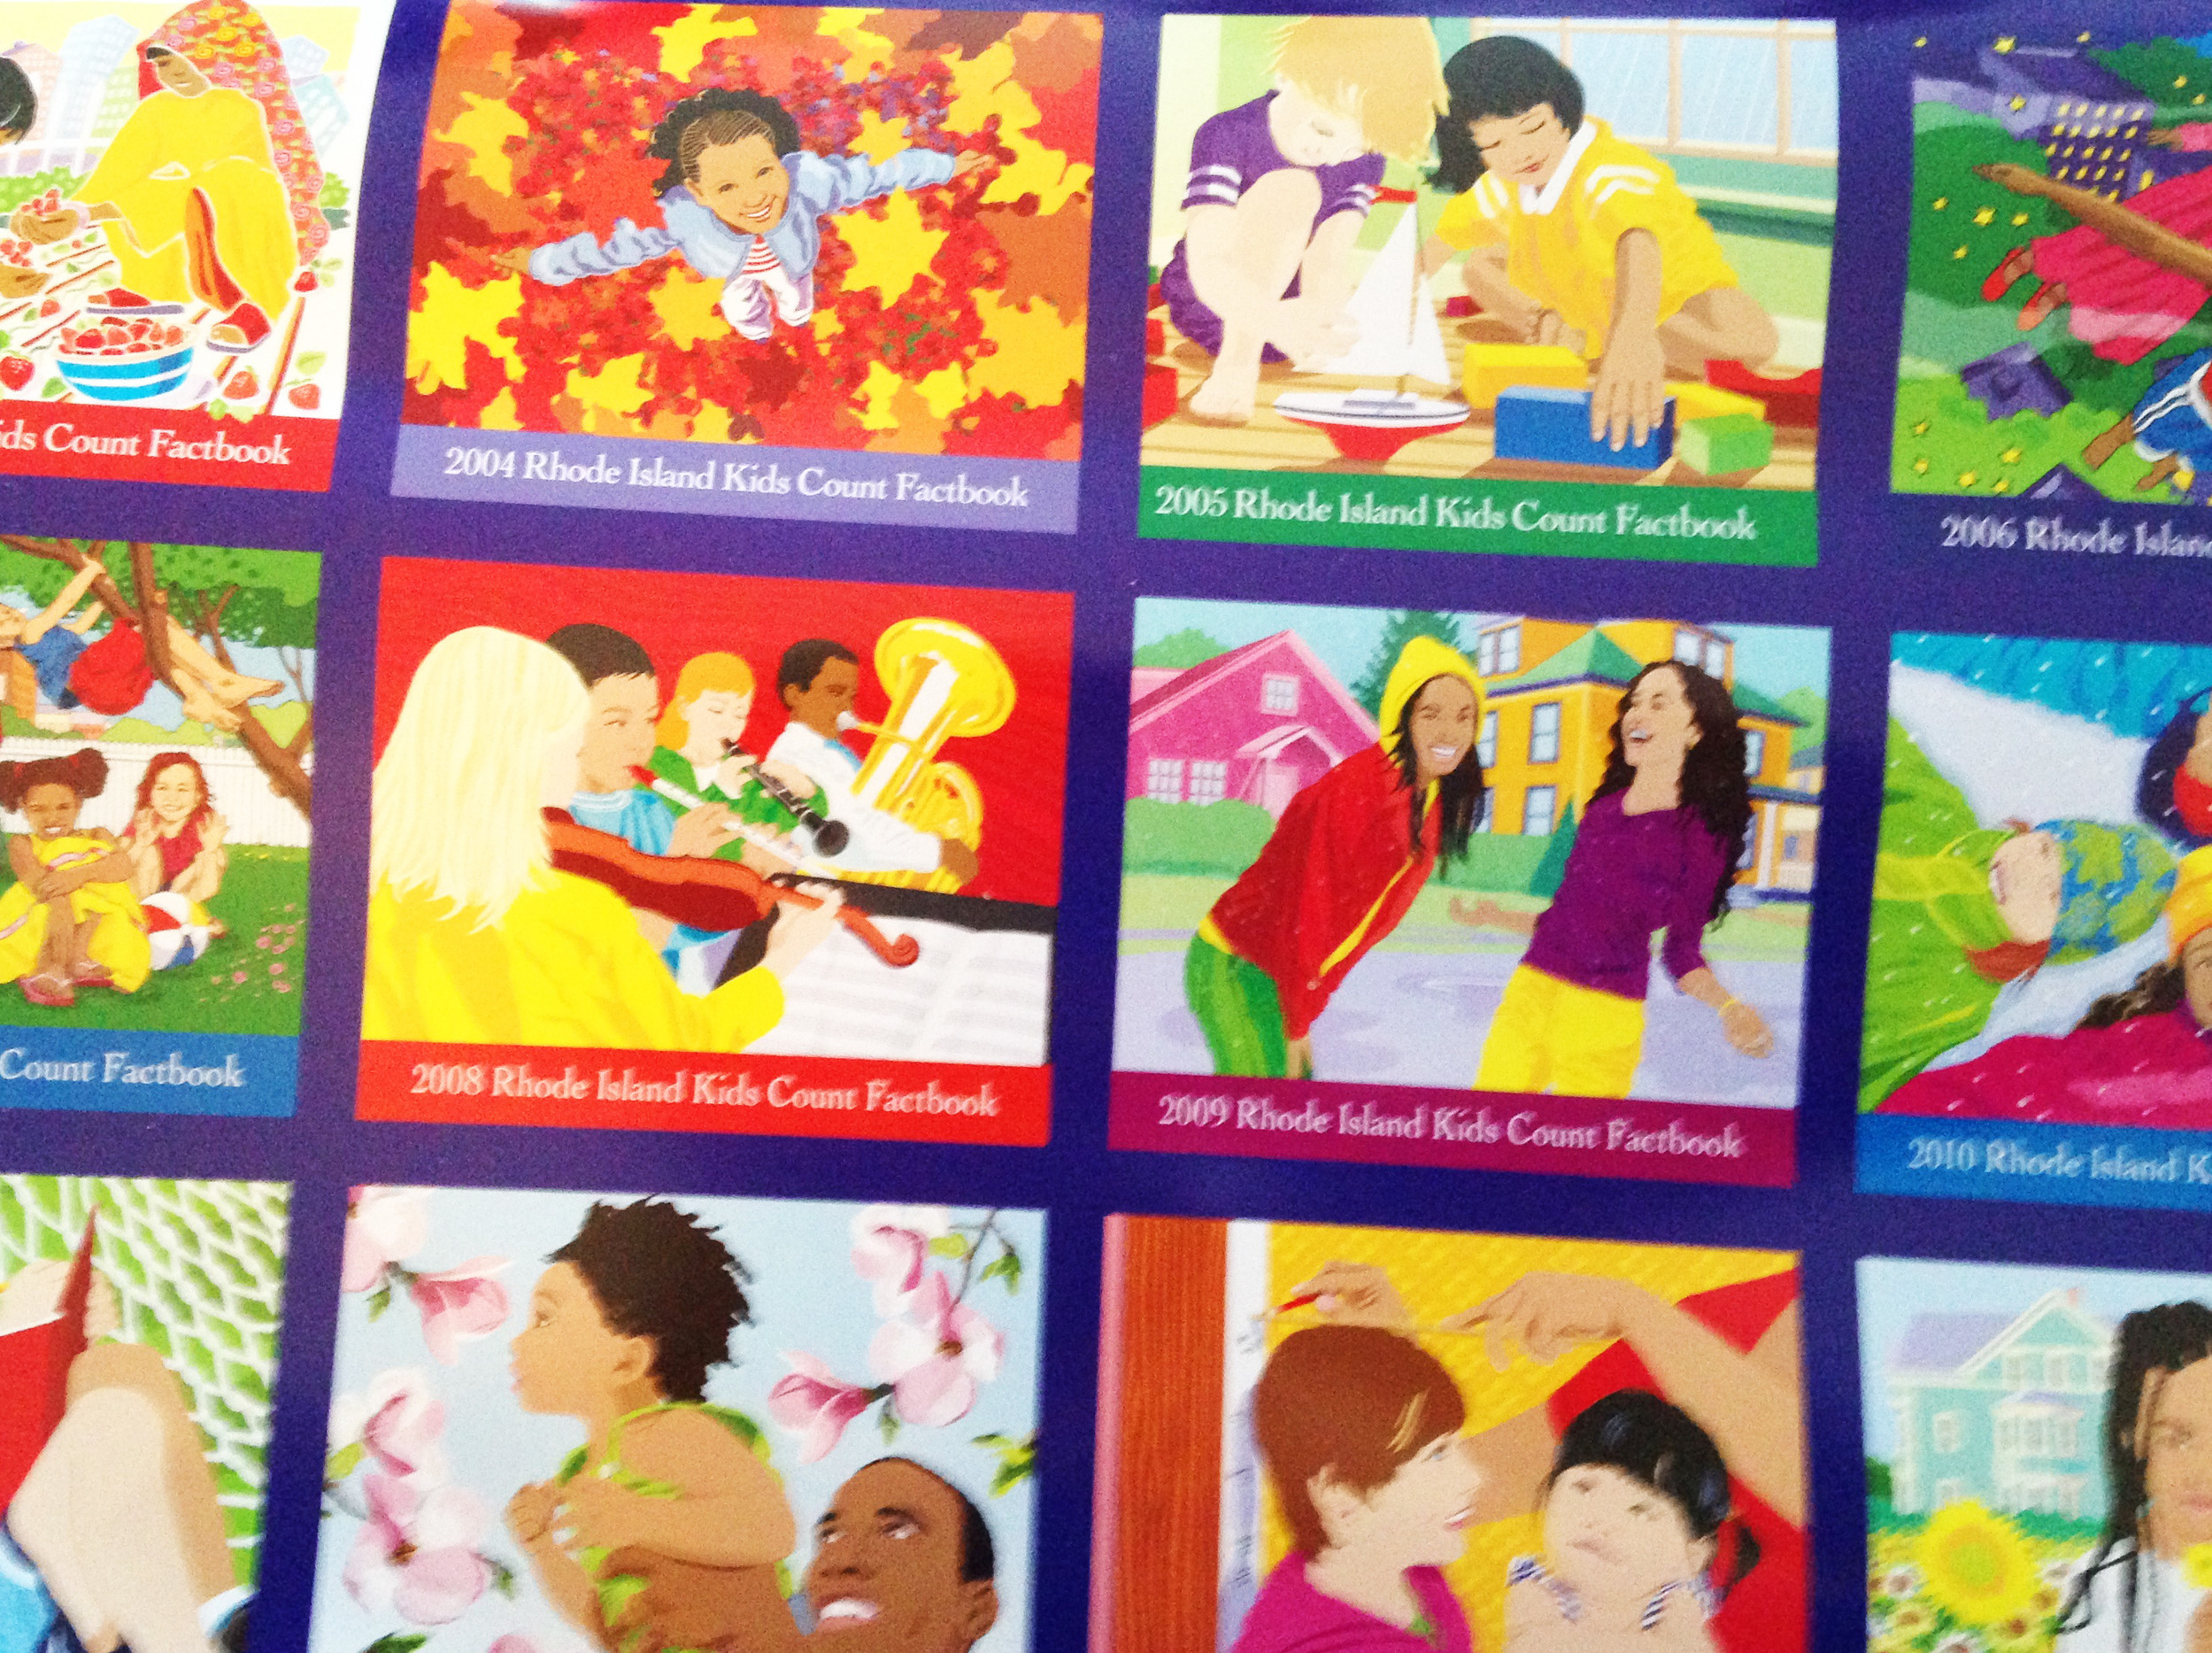 Images from a collage of covers of the first 20 Rhode Island Kids Count Factbooks published as a poster in 2014